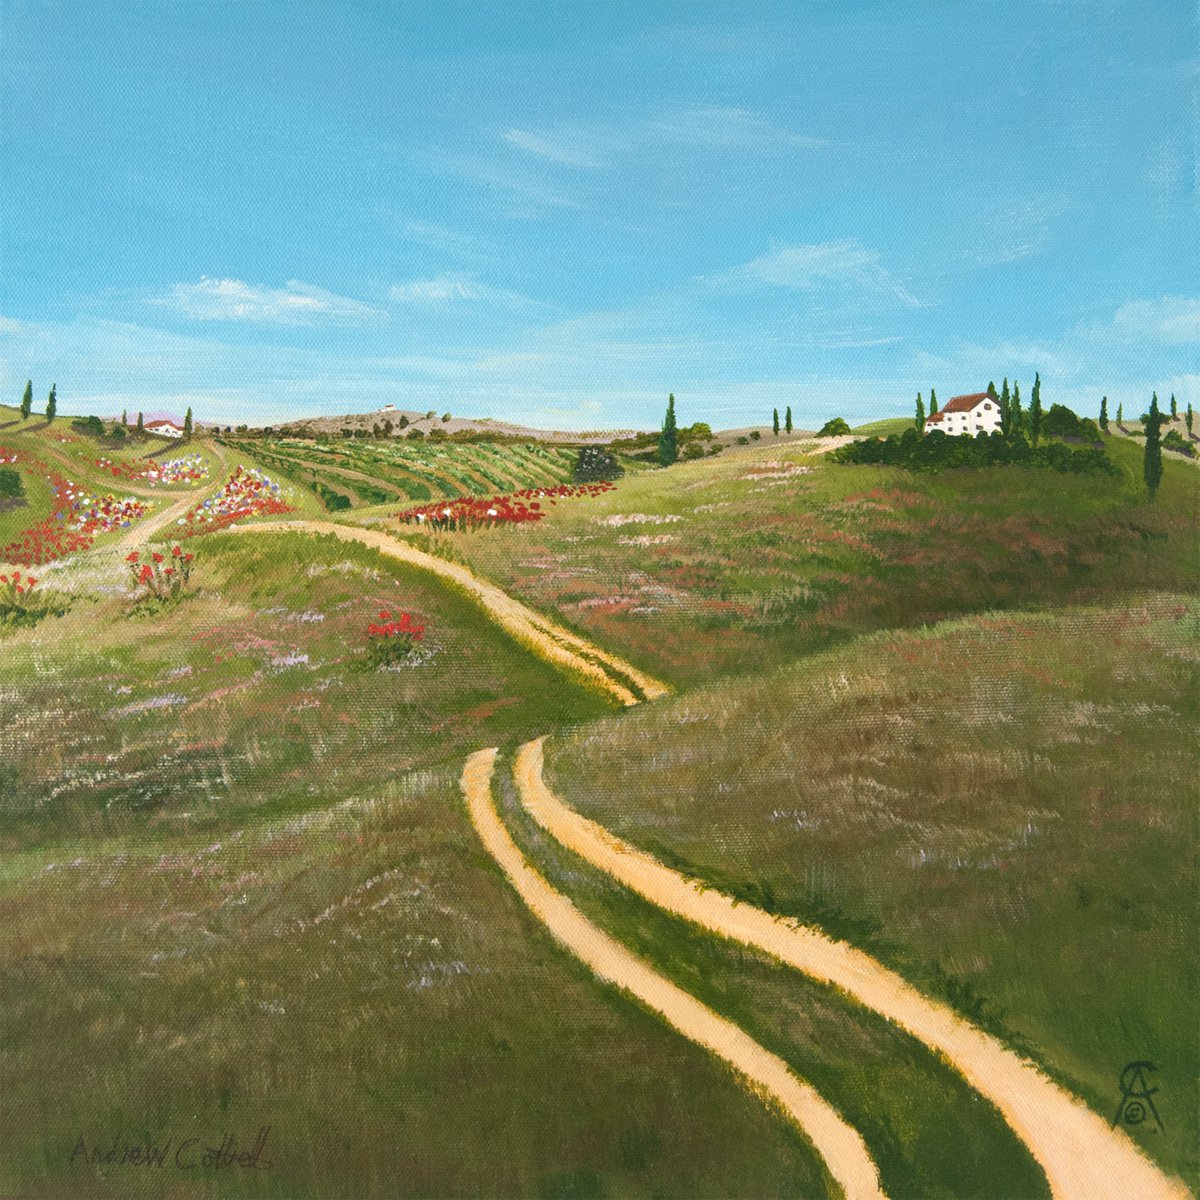 Long and Winding Road by Andrew Cottrell